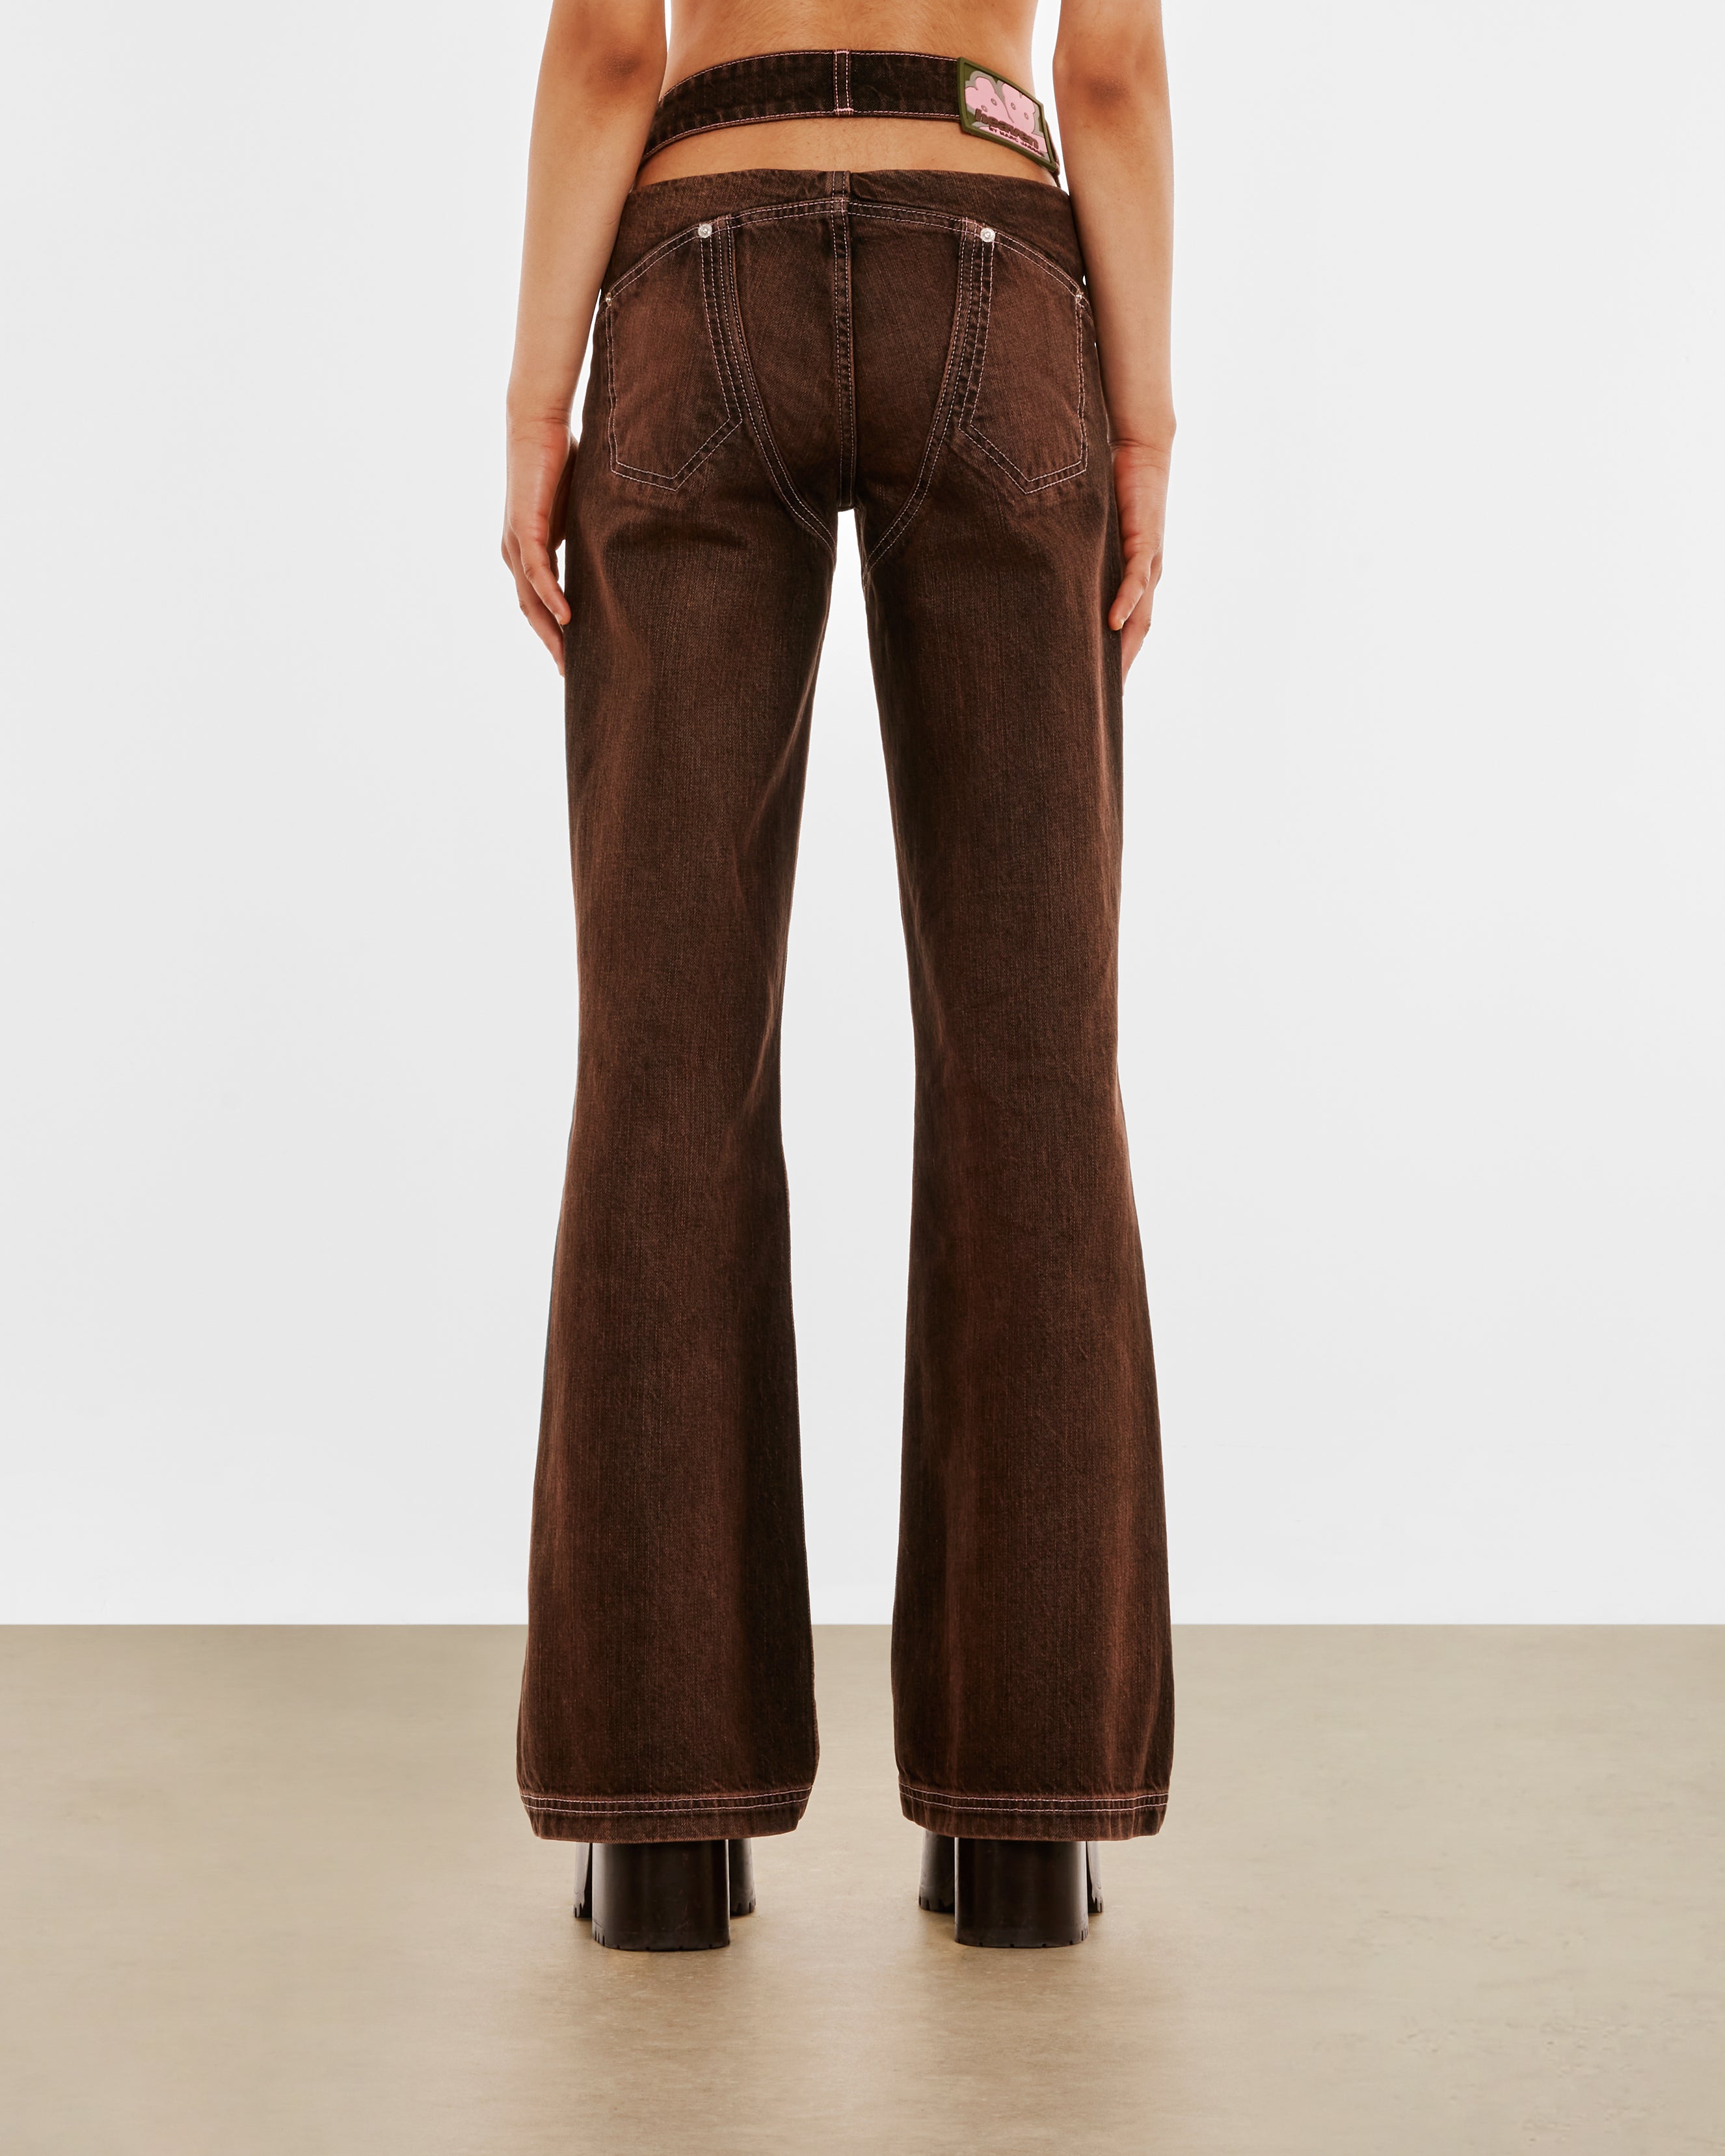 Heaven By Marc Jacobs - Women's Detached Waistband Flare Jeans - (Brown)